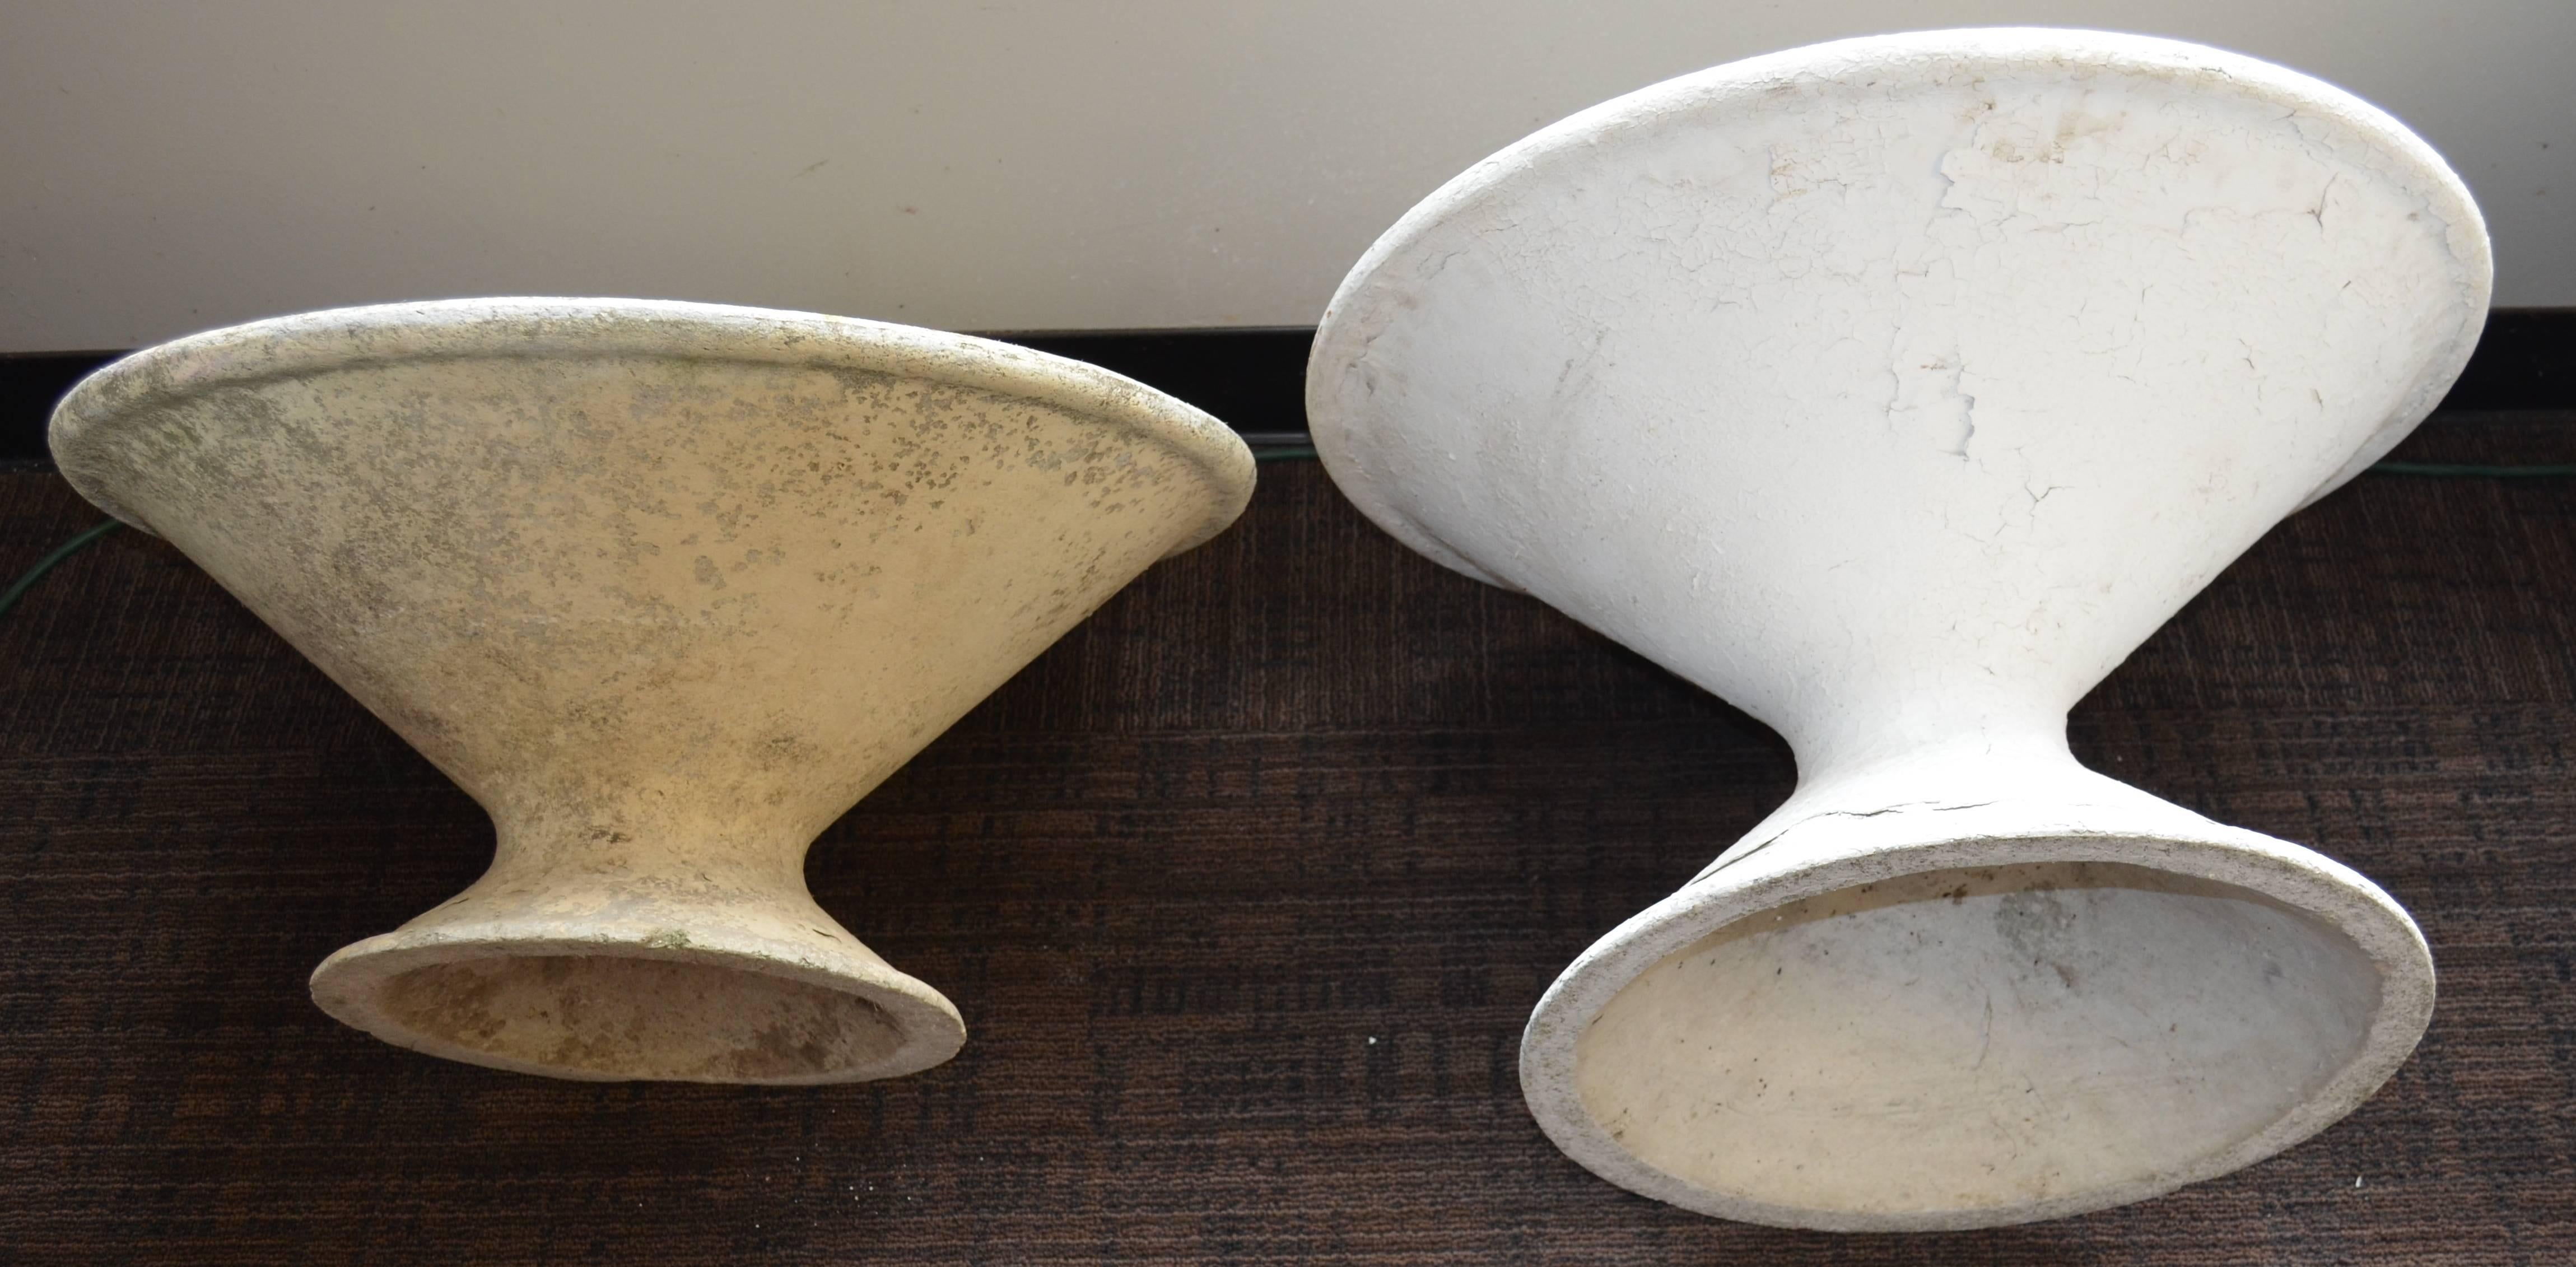 Swiss Garden Planters of Saucer Formed Stone by Willy Guhl, Offered as a Pair